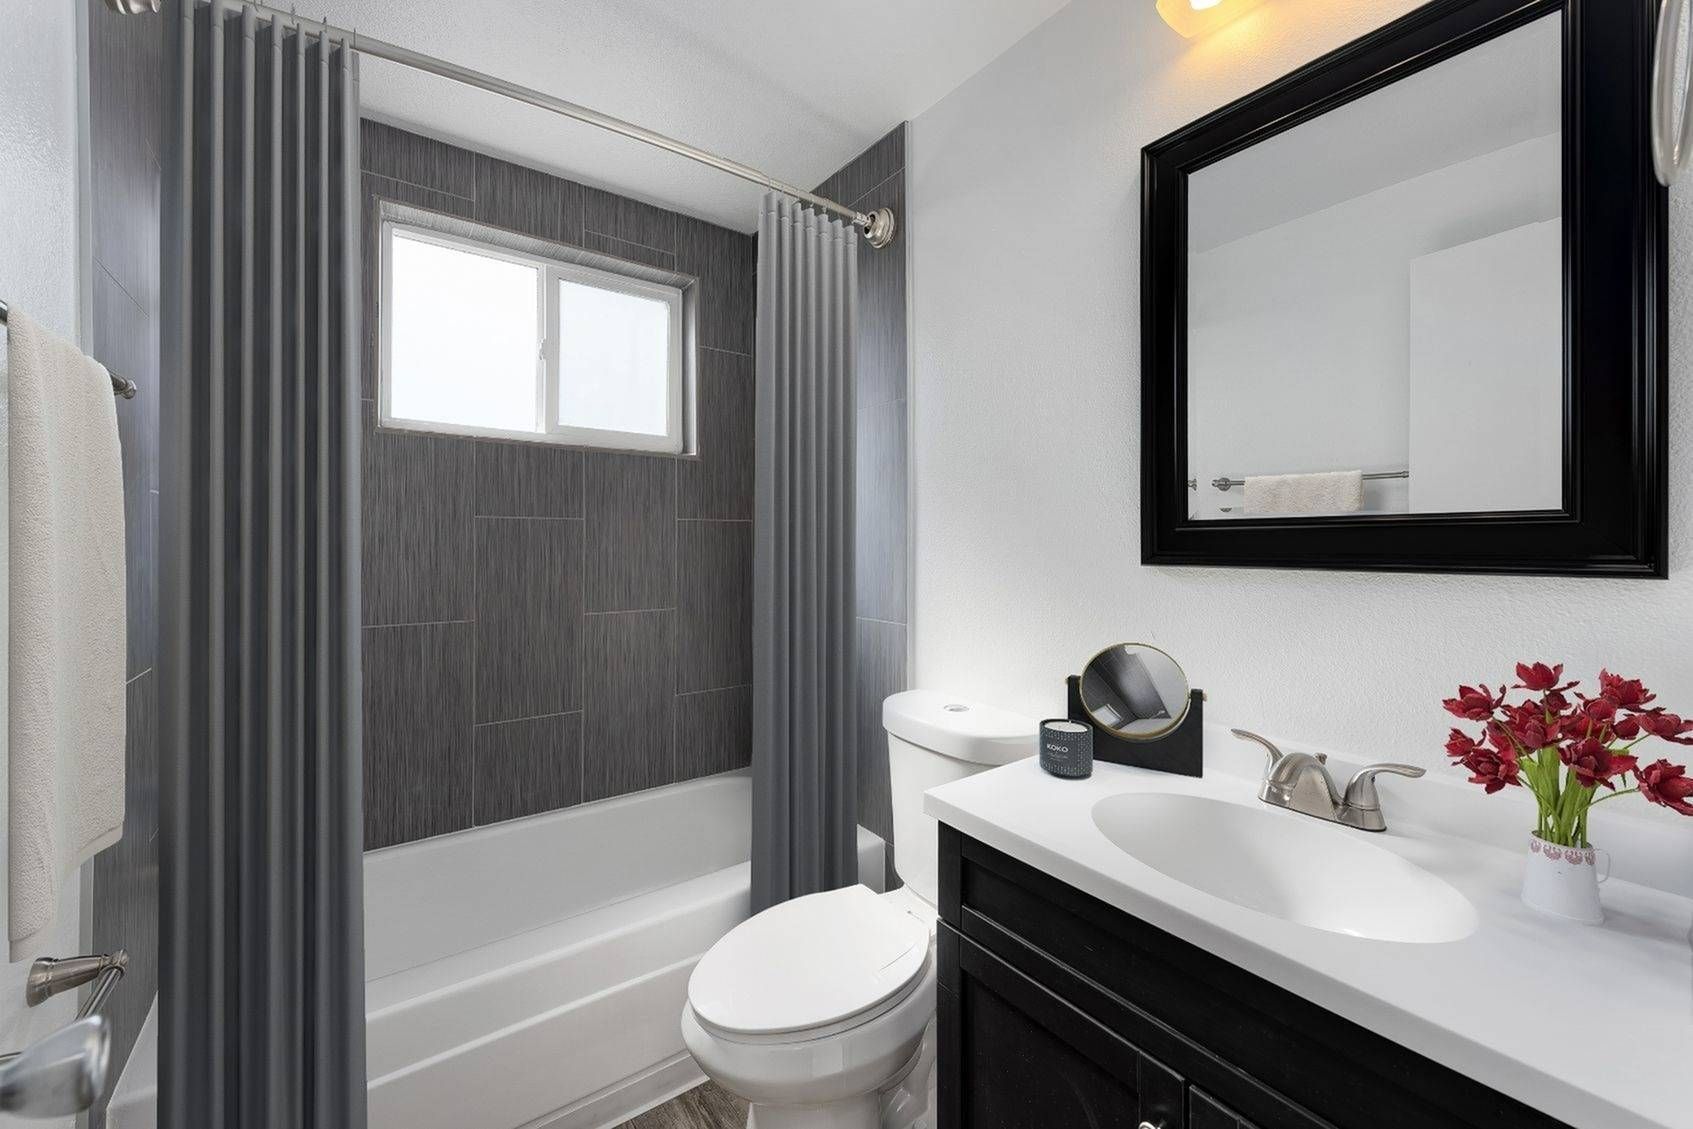 Modern apartment bathroom with shower/bath, toilet, sink, and mirror at Southglenn Place.